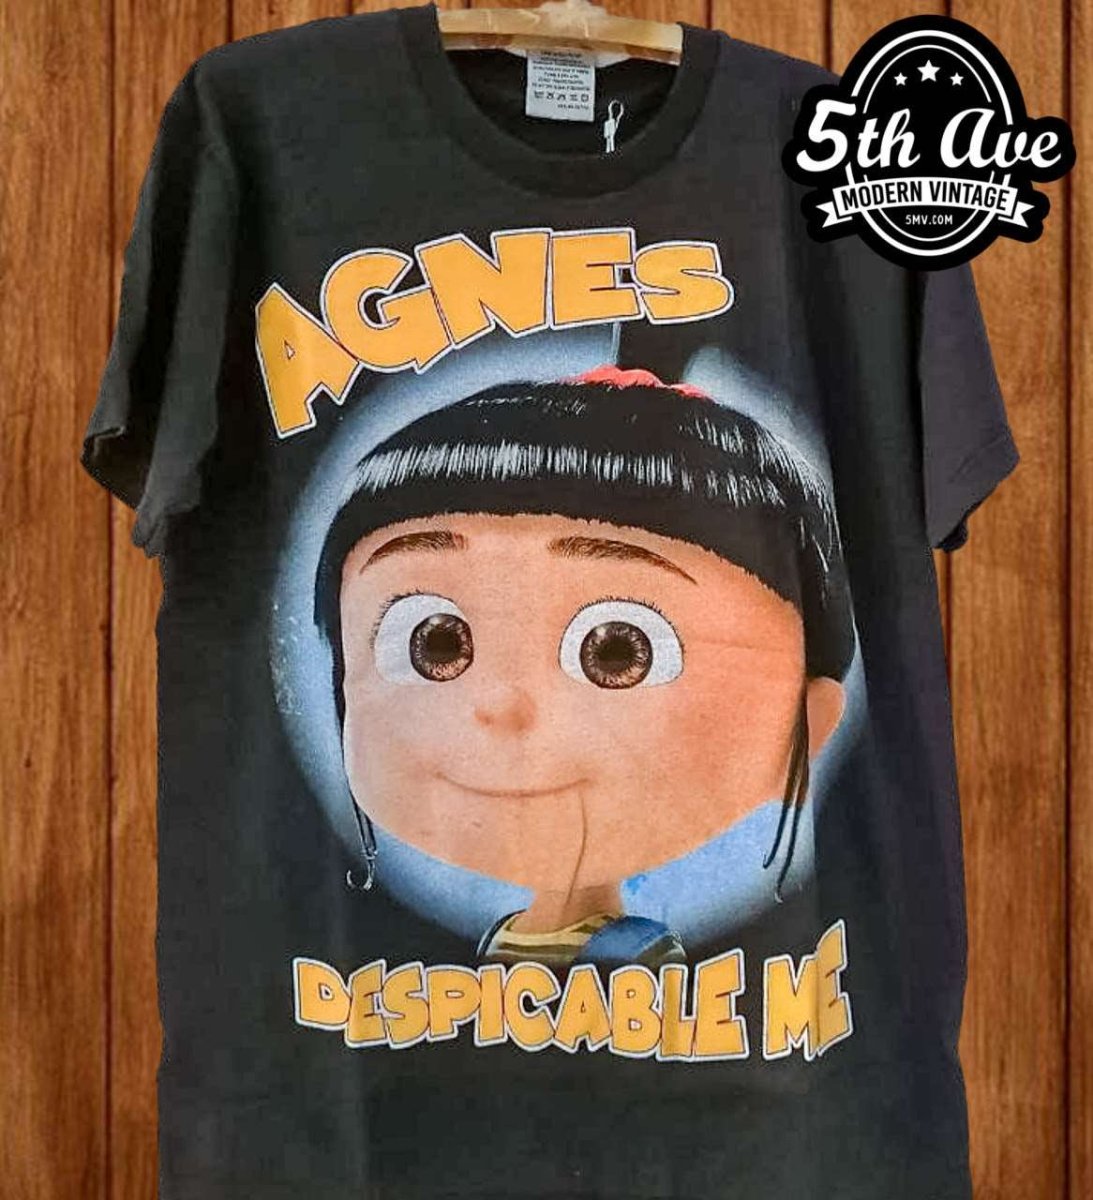 Despicable Me Agnes and Her Unicorn Adventure t shirt - Vintage Band Shirts